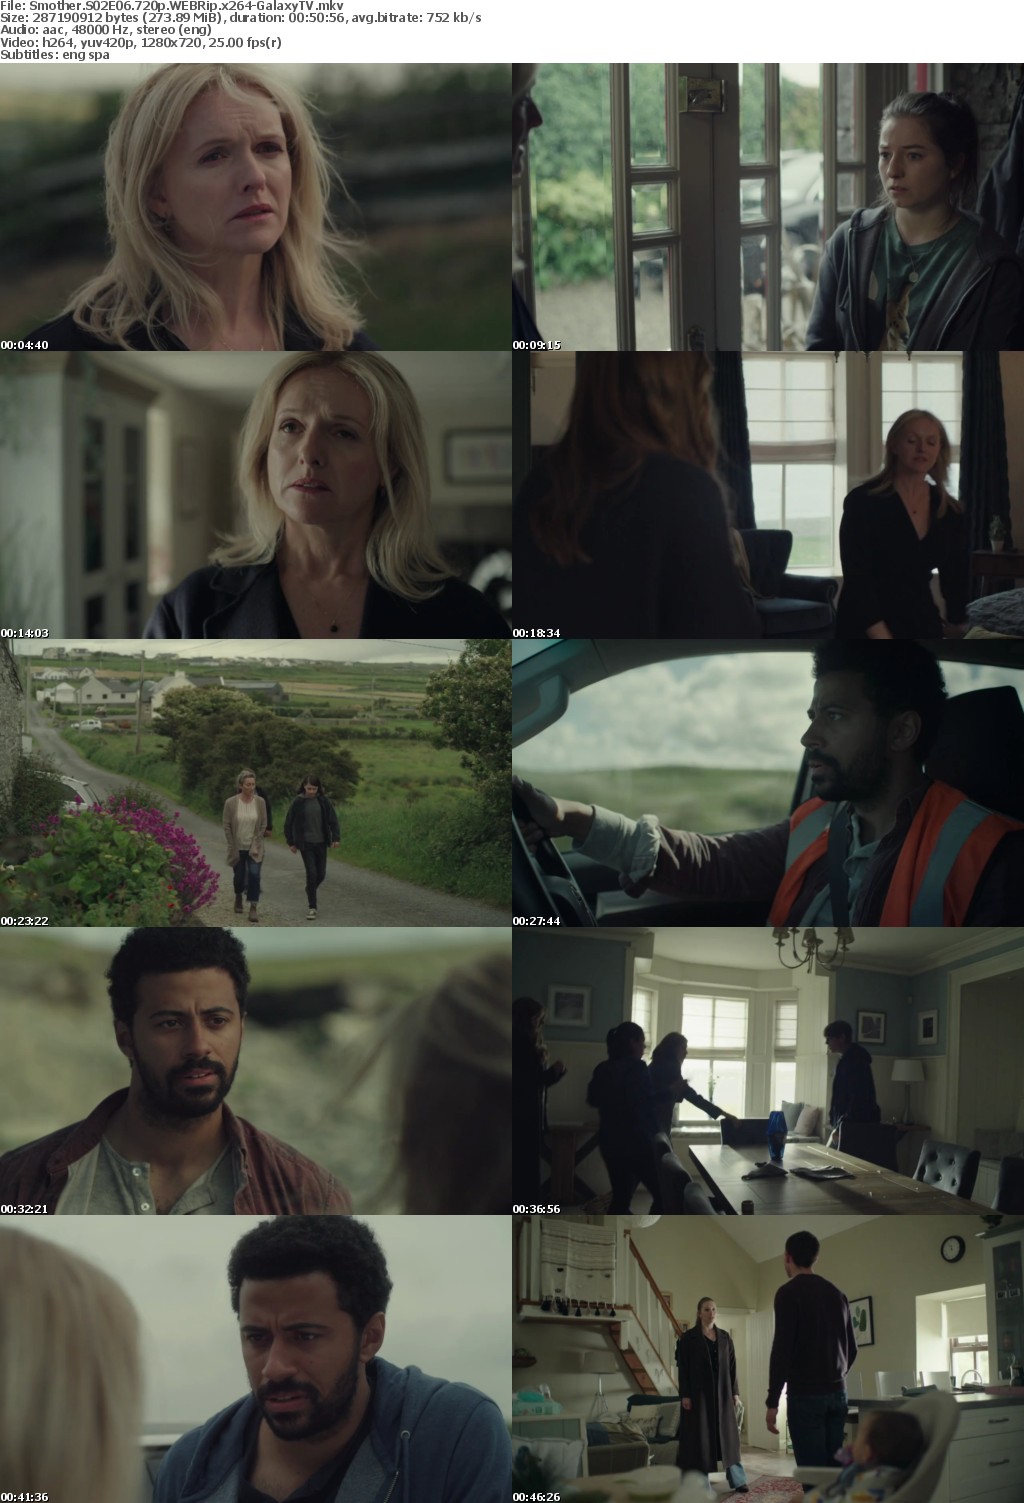 Smother S02 COMPLETE 720p WEBRip x264-GalaxyTV